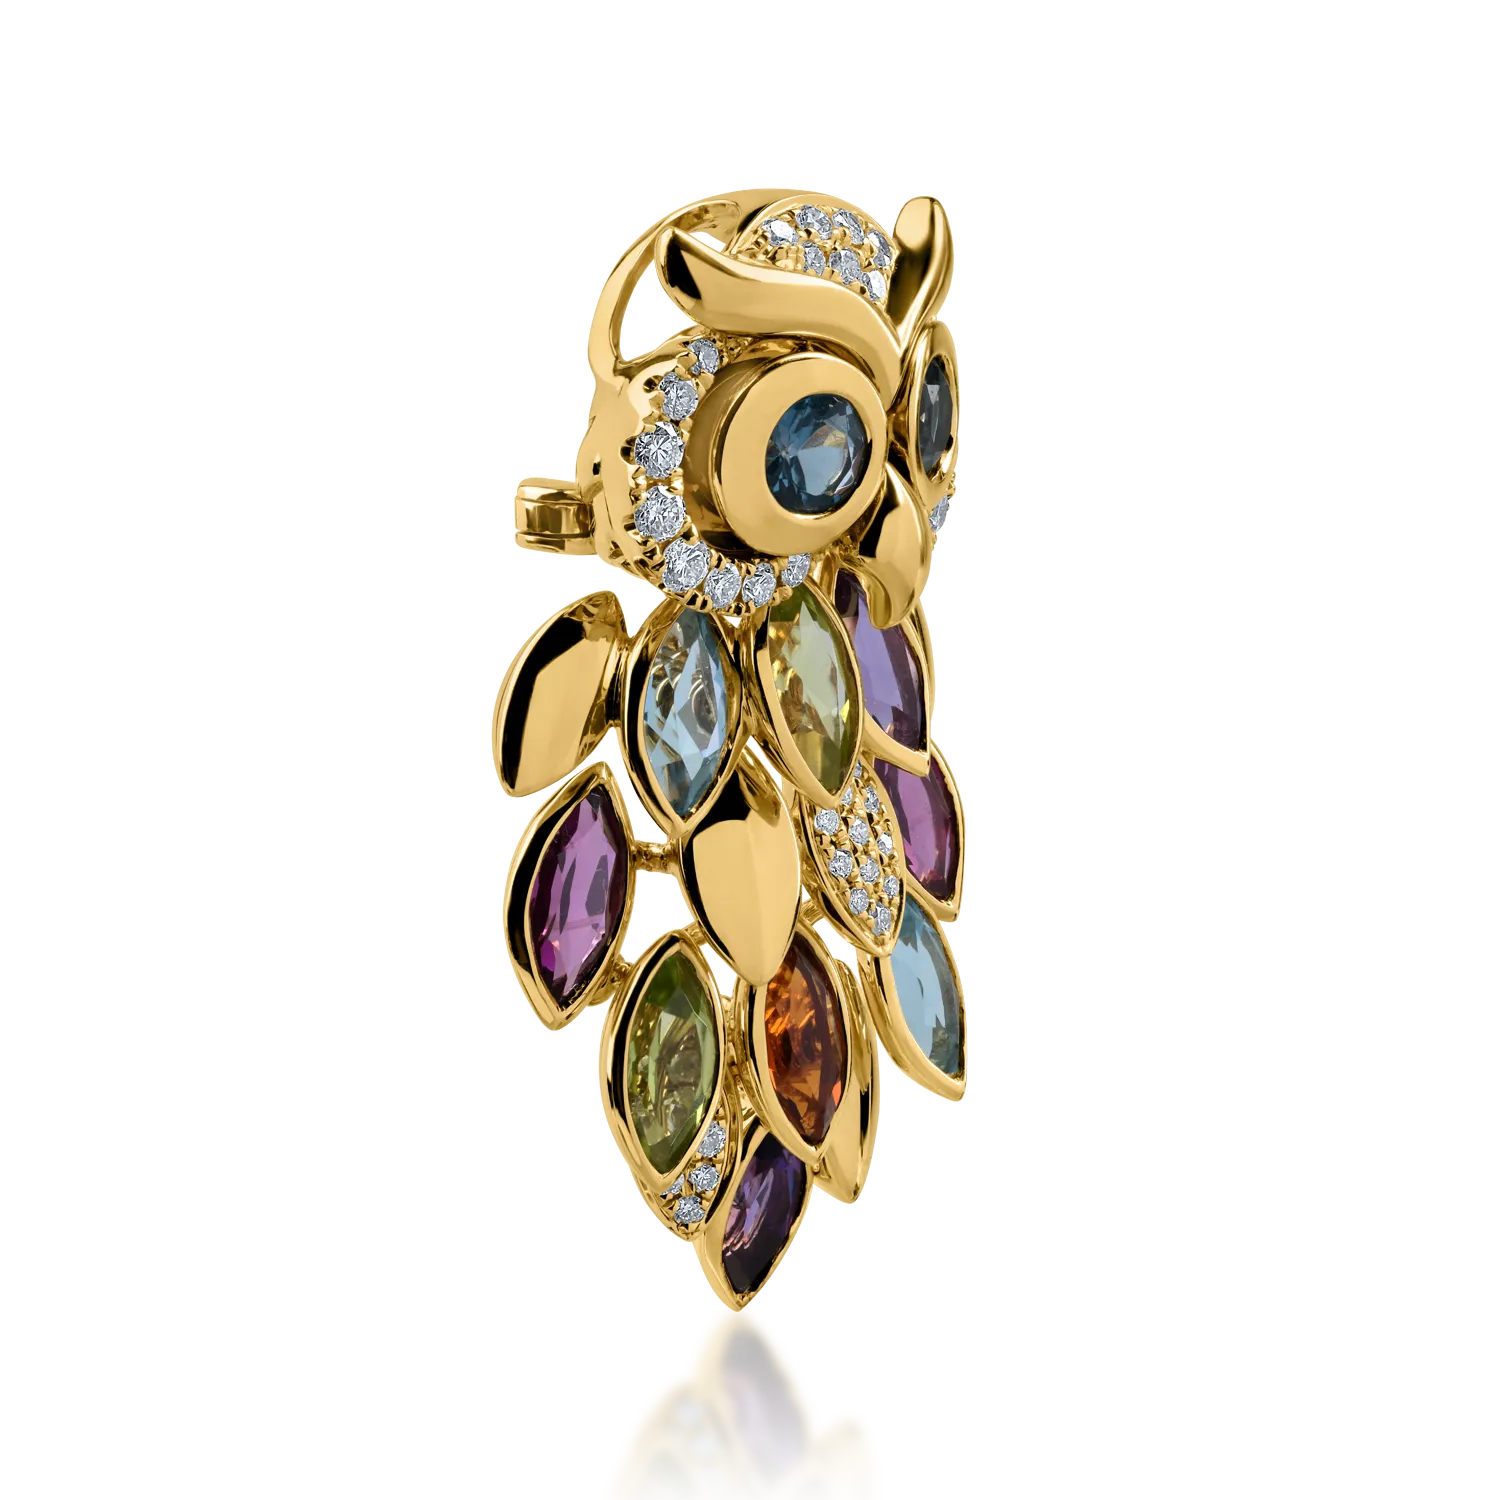 Yellow gold owl brooch with 3.23ct precious and semi-precious stones